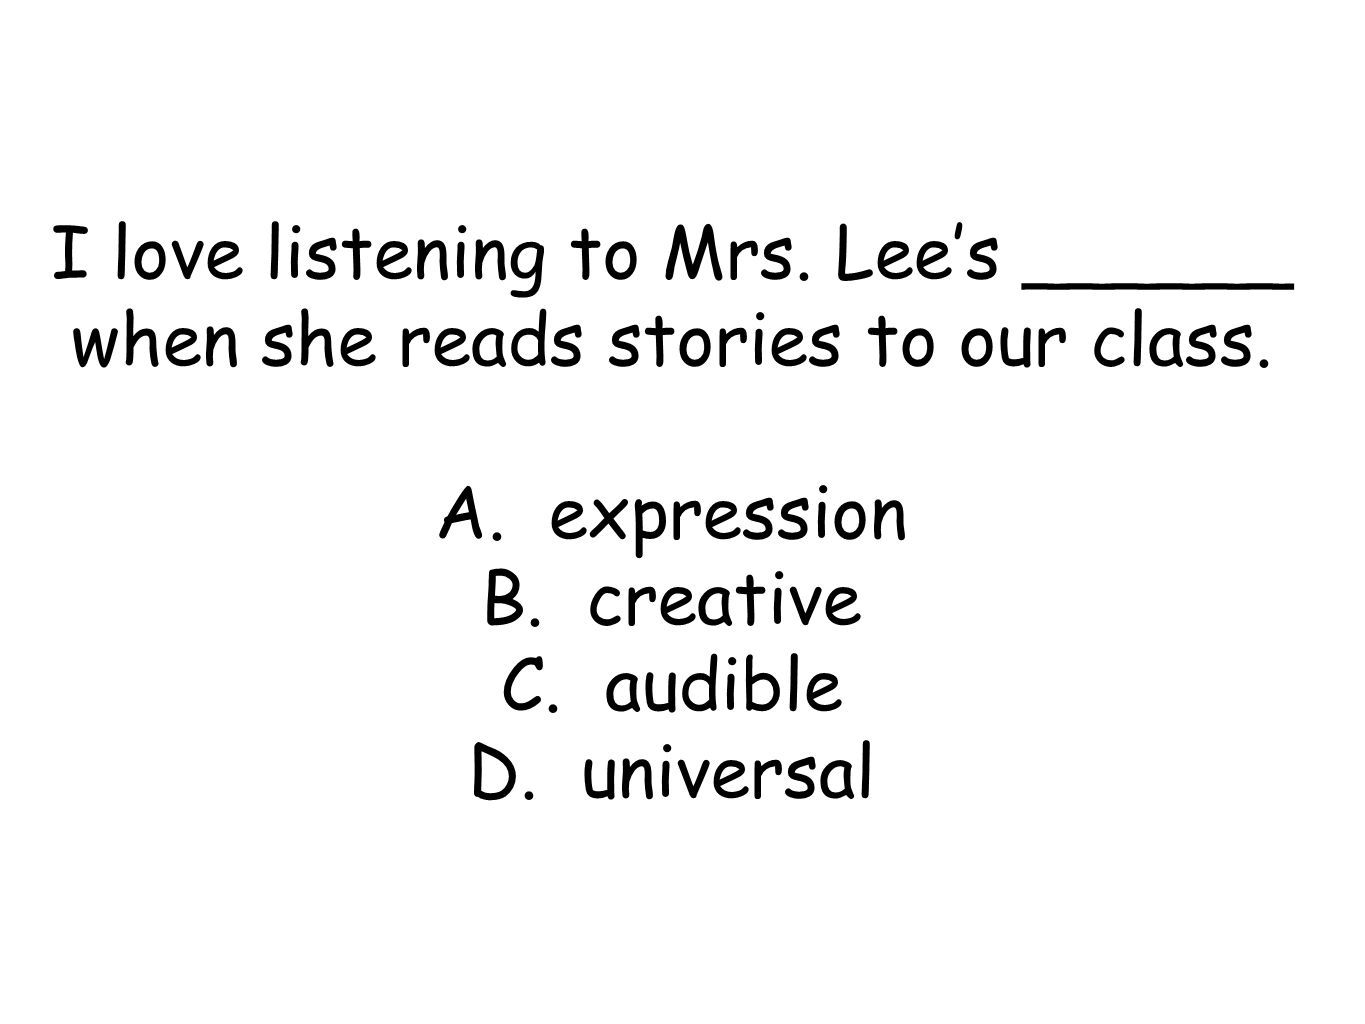 I love listening to Mrs. Lee’s ______ when she reads stories to our class.